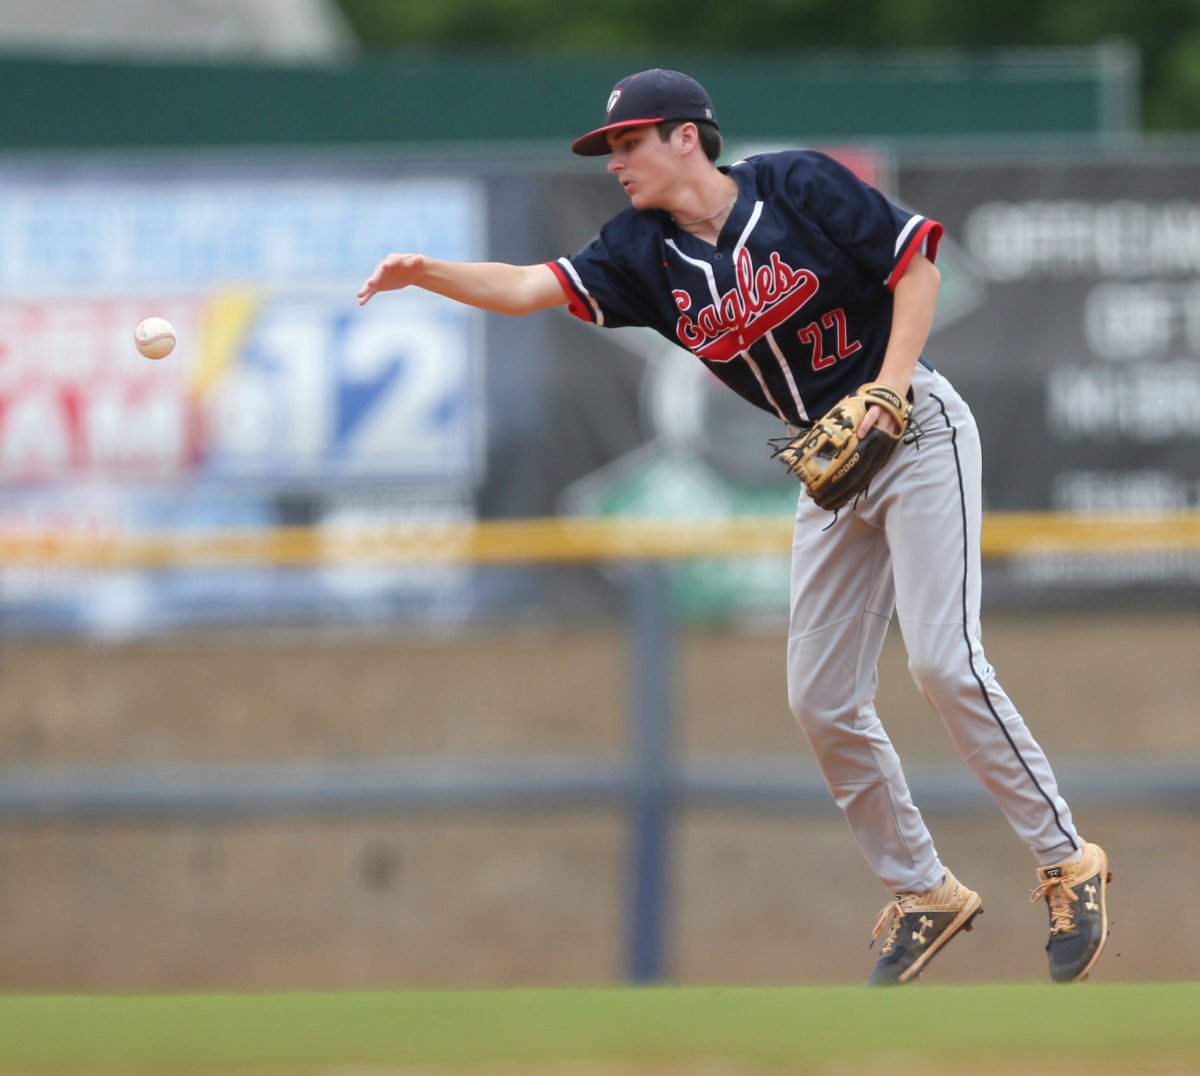 Tupelo Christian's Logan White (22) attempts to grab a ground ball at second base. Tupelo Christian and Resurrection played in game 2 of the MHSAA Class 1A Baseball Championship on Thursday, June 3, 2021 at Trustmark Park. Photo by Keith Warren